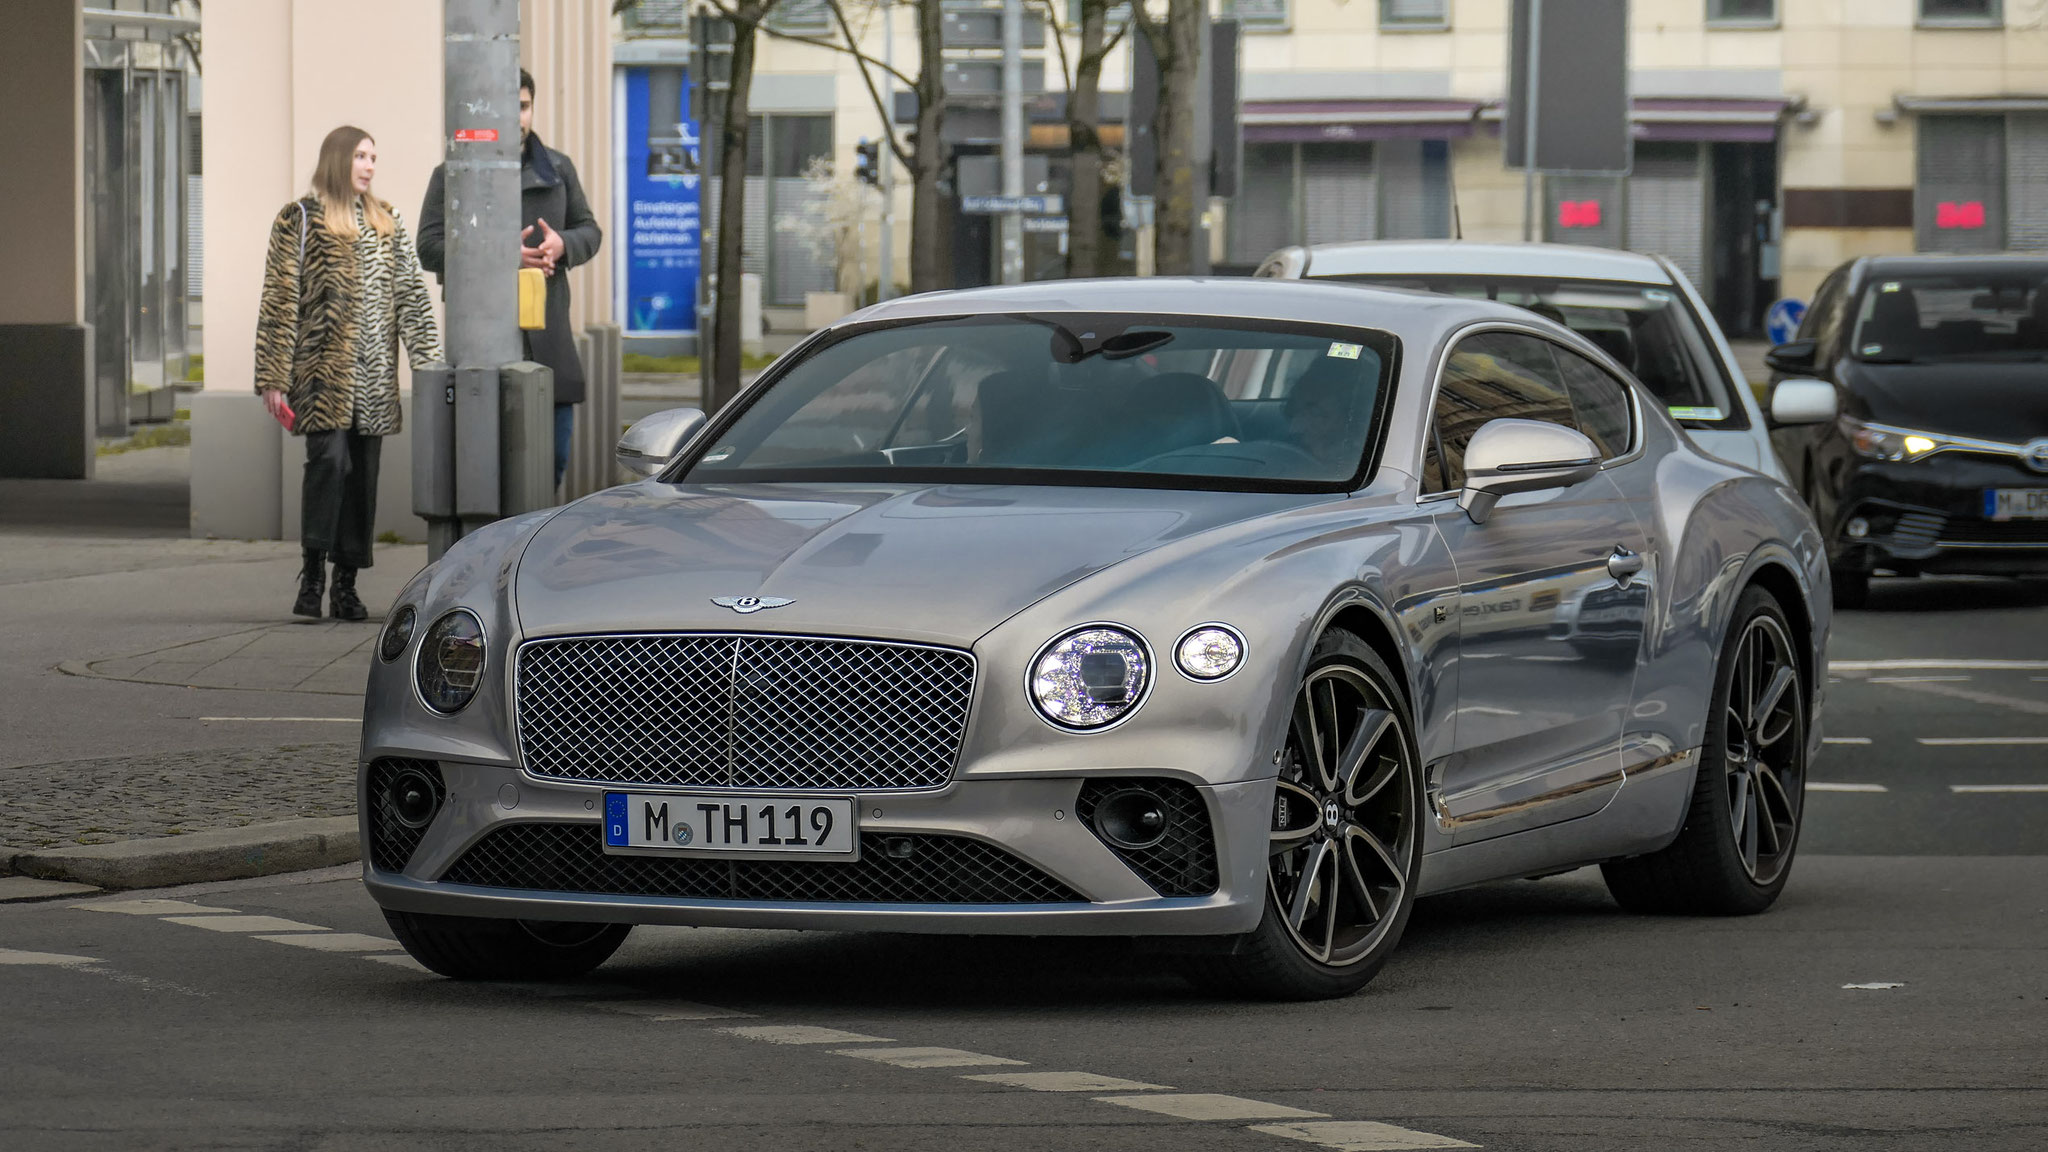 Bentley Continental GT - M-TH-119